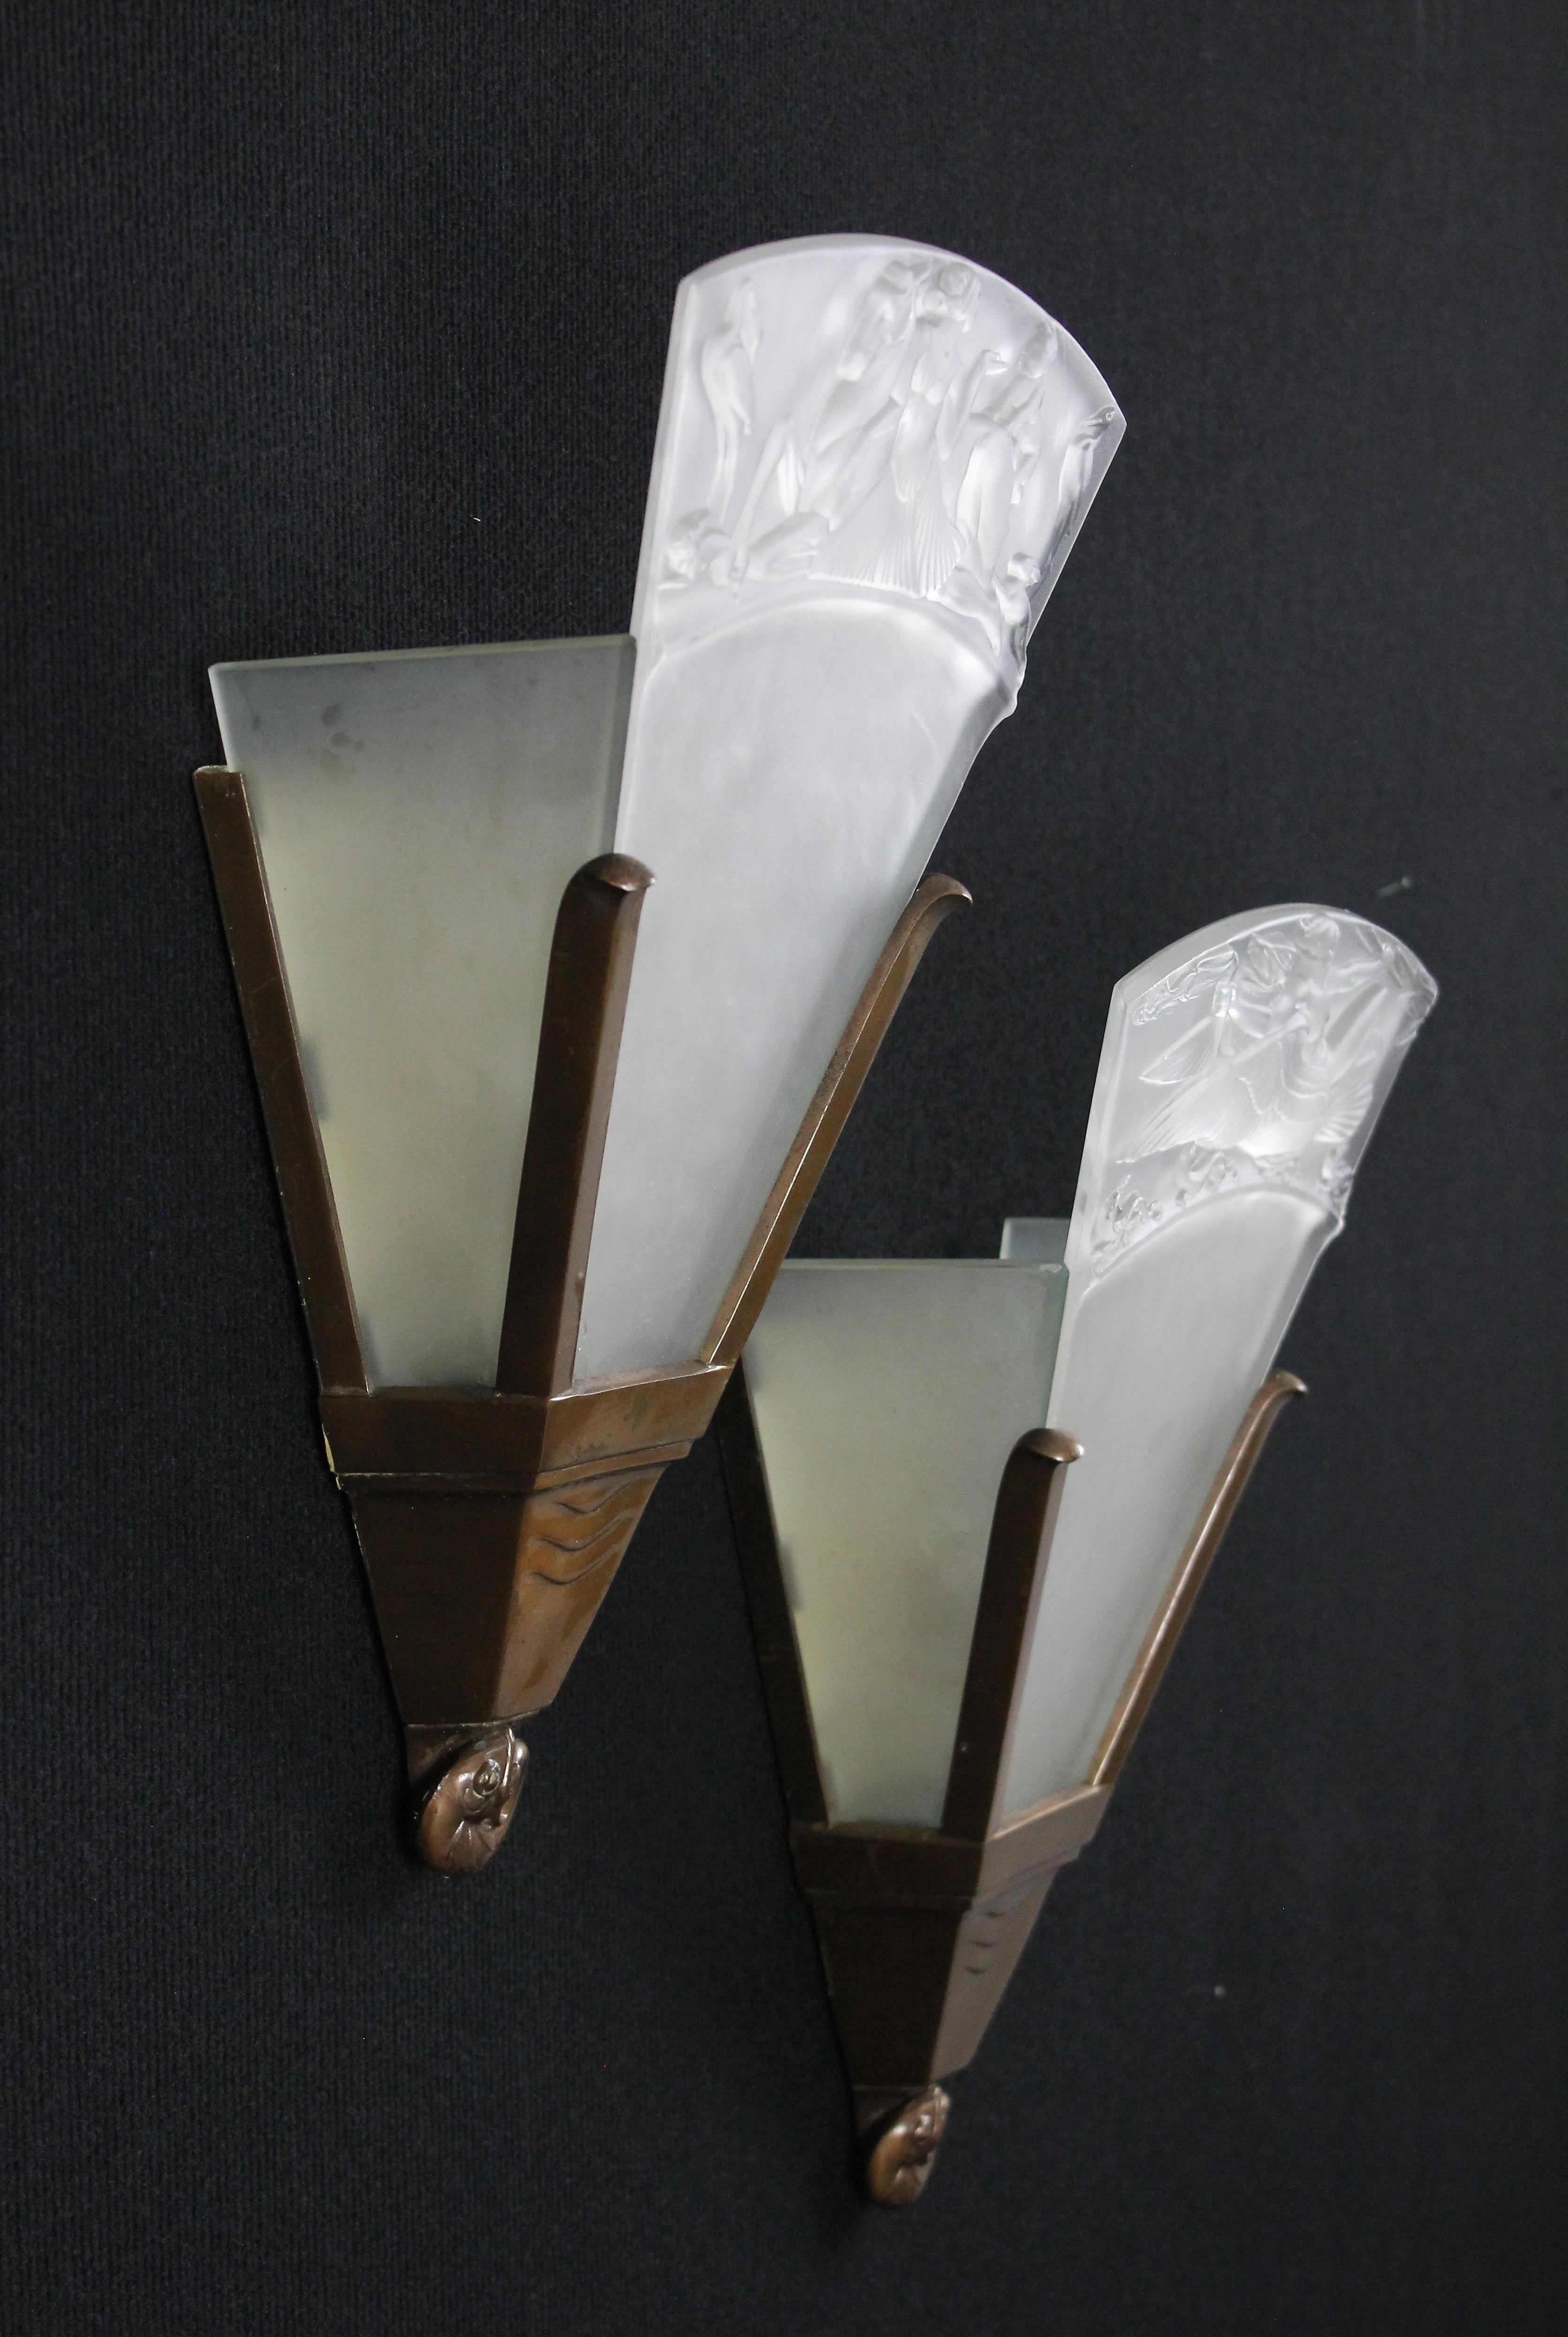 Wonderful set of Art Deco 1930s wall lights.
Made by John Walsh Walsh (1850-1951), design most certainly by Walter Gilbert (1871-1946).
The front glass panels both signed 